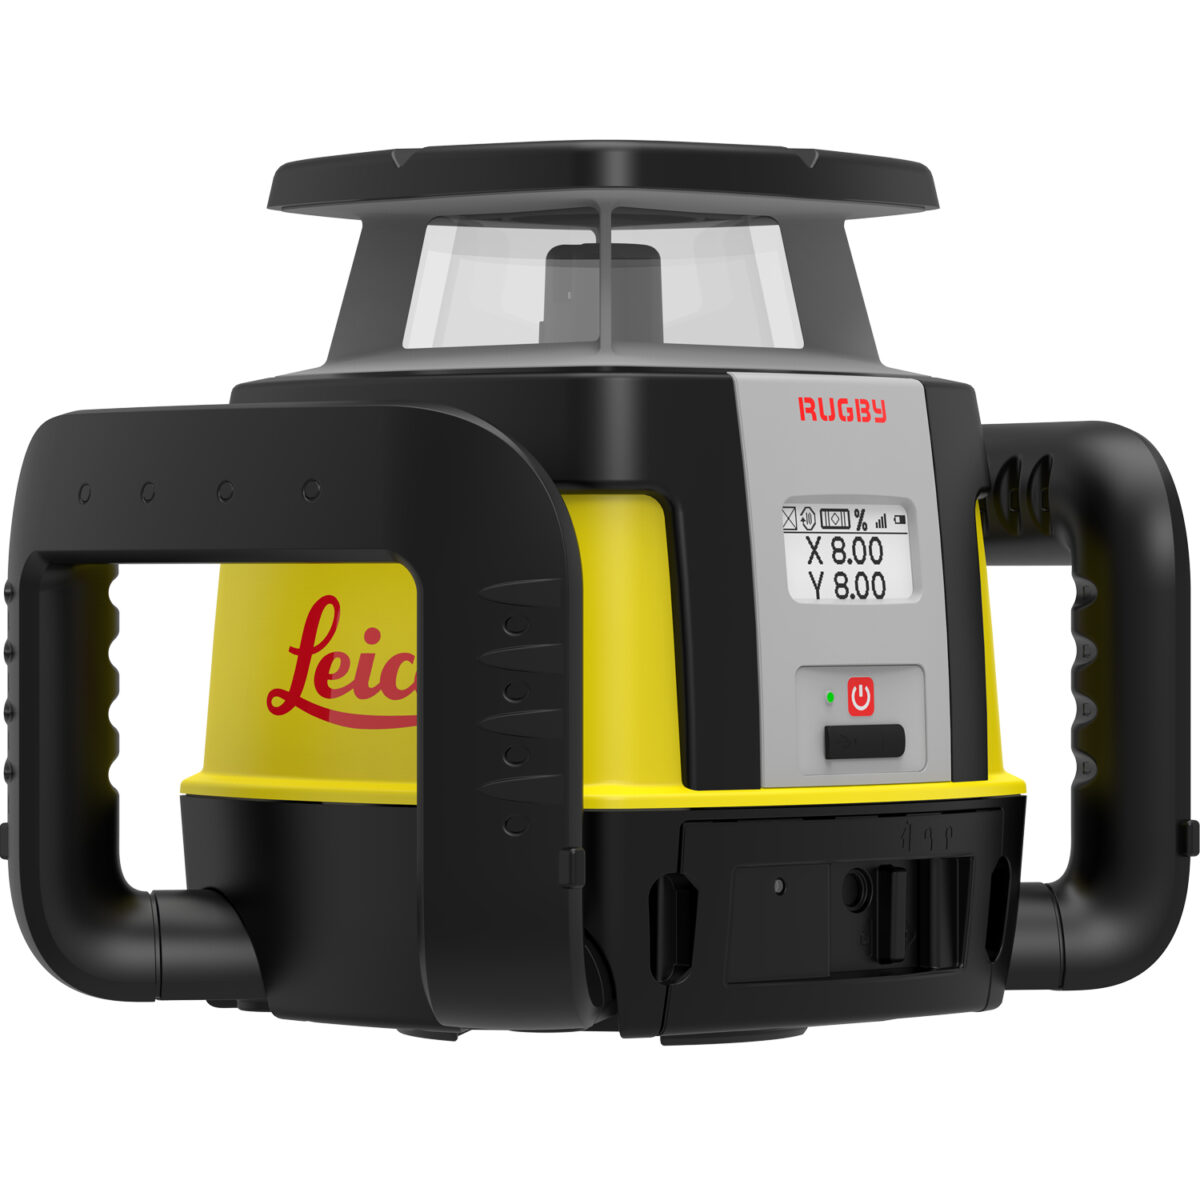 Leica Rugby CLH - right